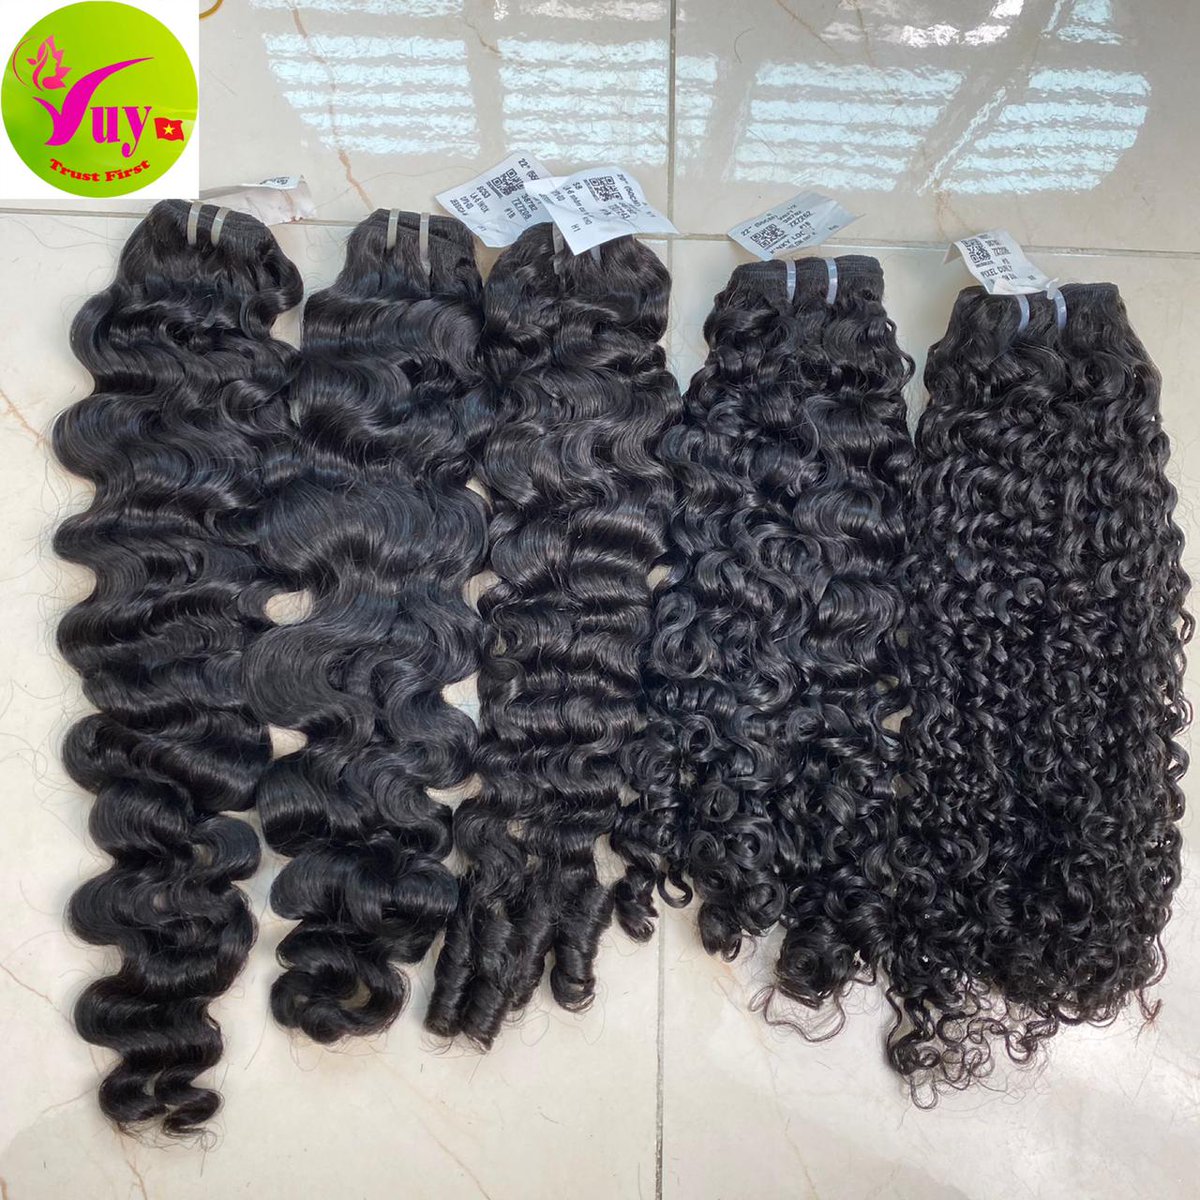 What Styles will you choose today?
Contact with me on Whatsapp
😍+84 396092128.
#minktresses #rawhairbundles #rawhair #hairboutique #dmvhair #bmorehair #indriahair #rawhairextensions #bundles #rawhairvendor #rawhairs #protectivestyles #rawhairwholesale #lacefront